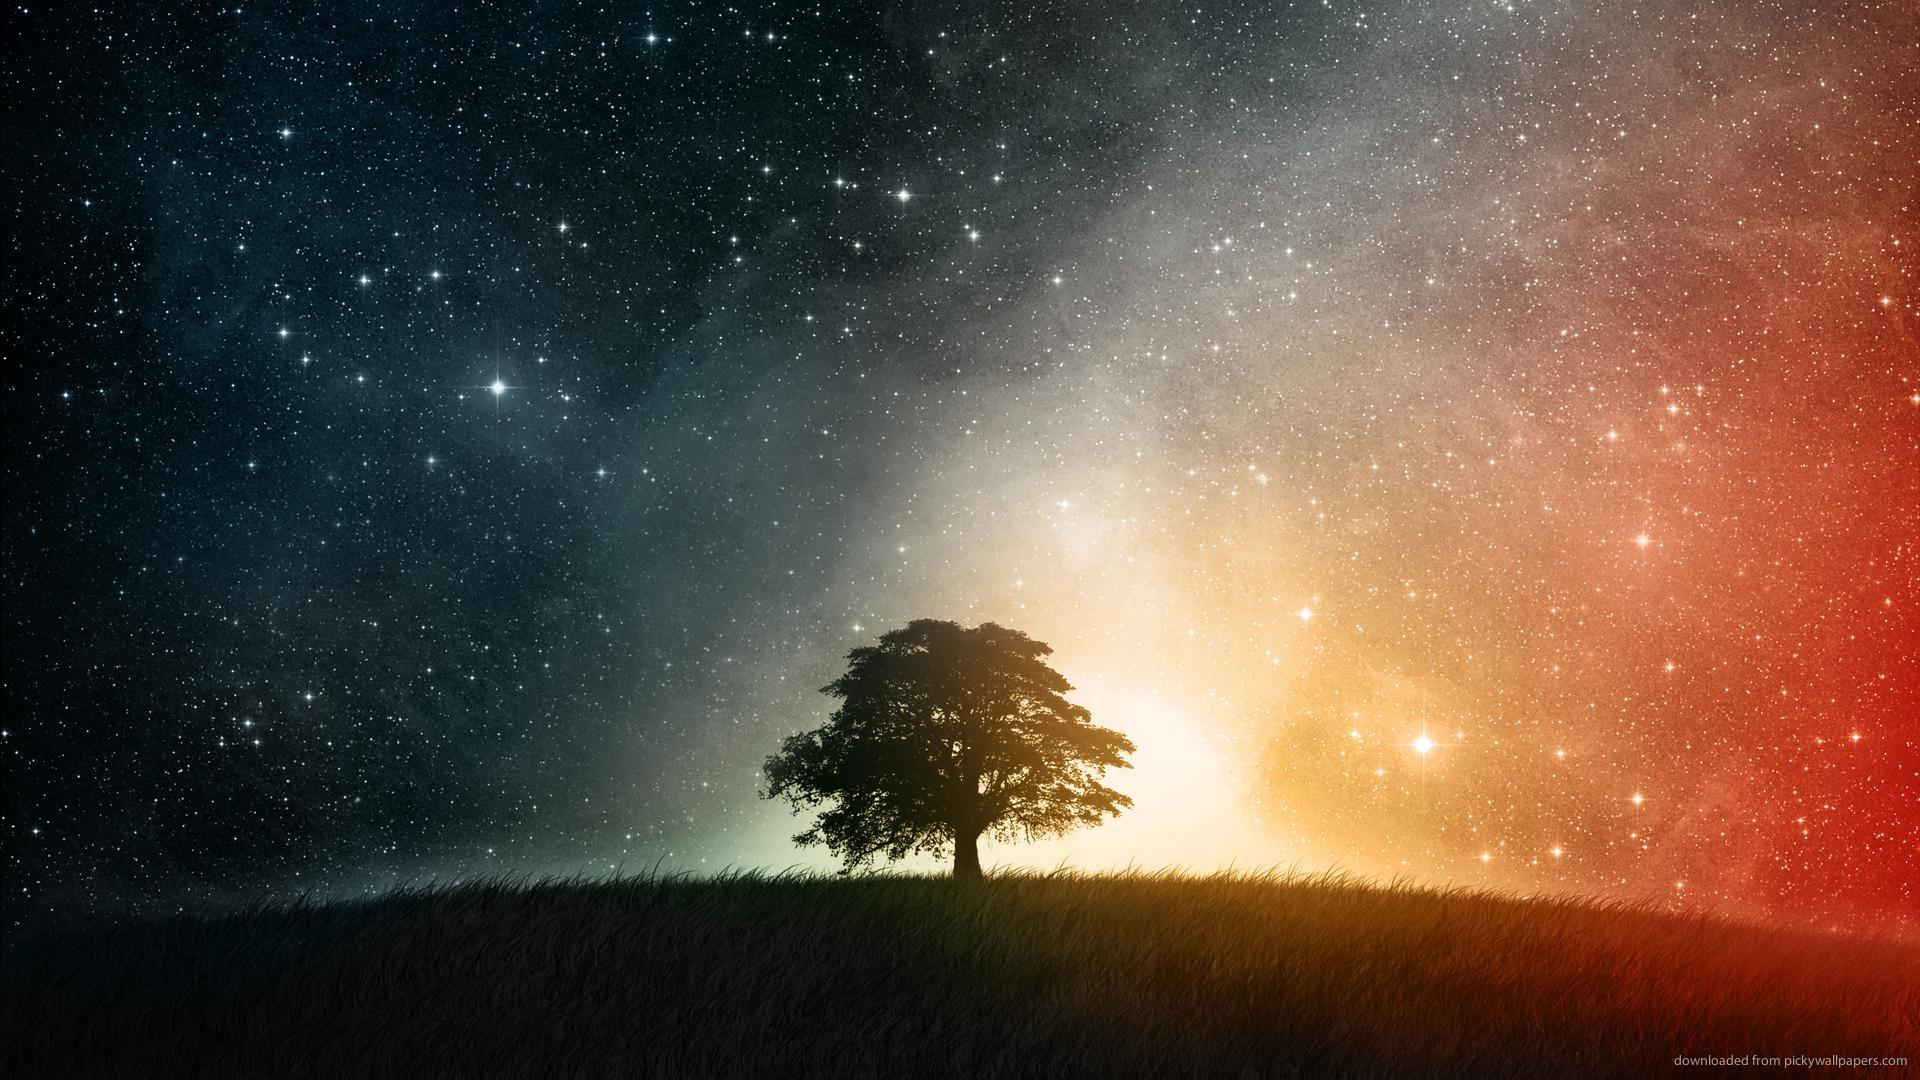 Download 1920x1080 Lonesome Tree With Starry Colorful Sky Wallpaper